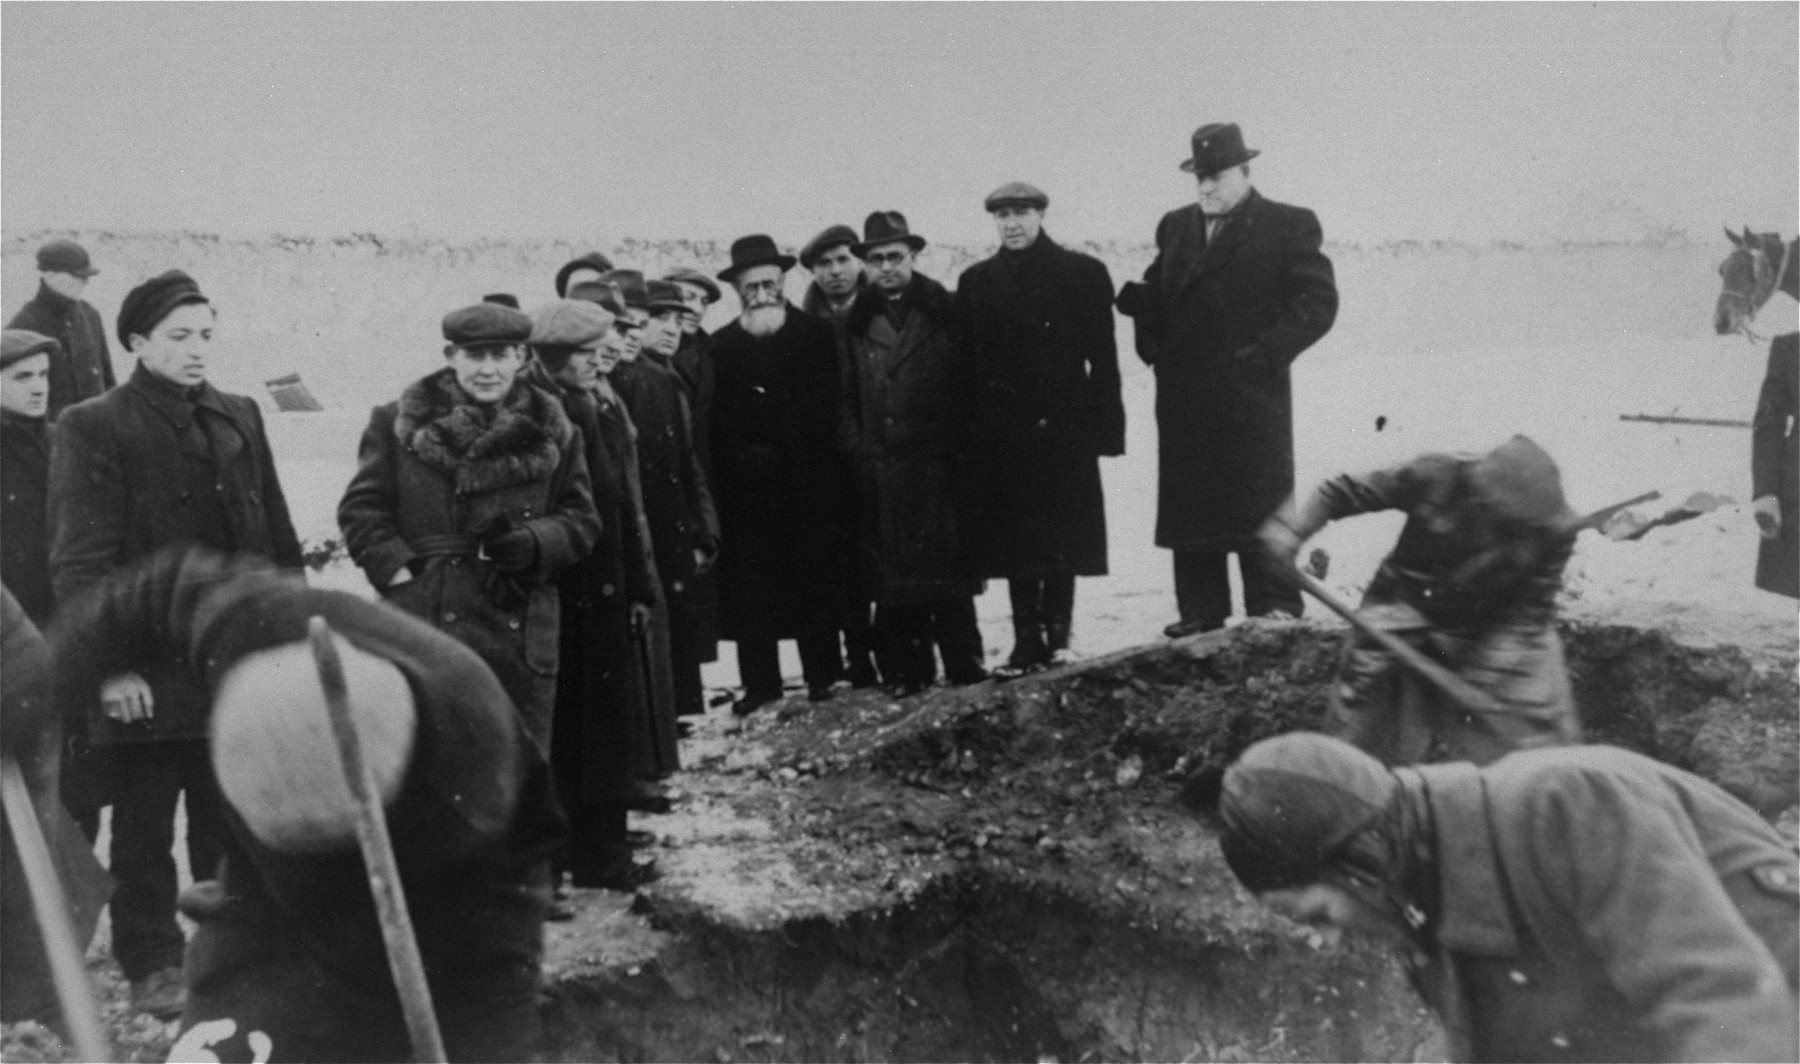 Jewish survivors exhume a mass grave containing the remains of Jews murdered by the Germans in Czestochowa during World War II.